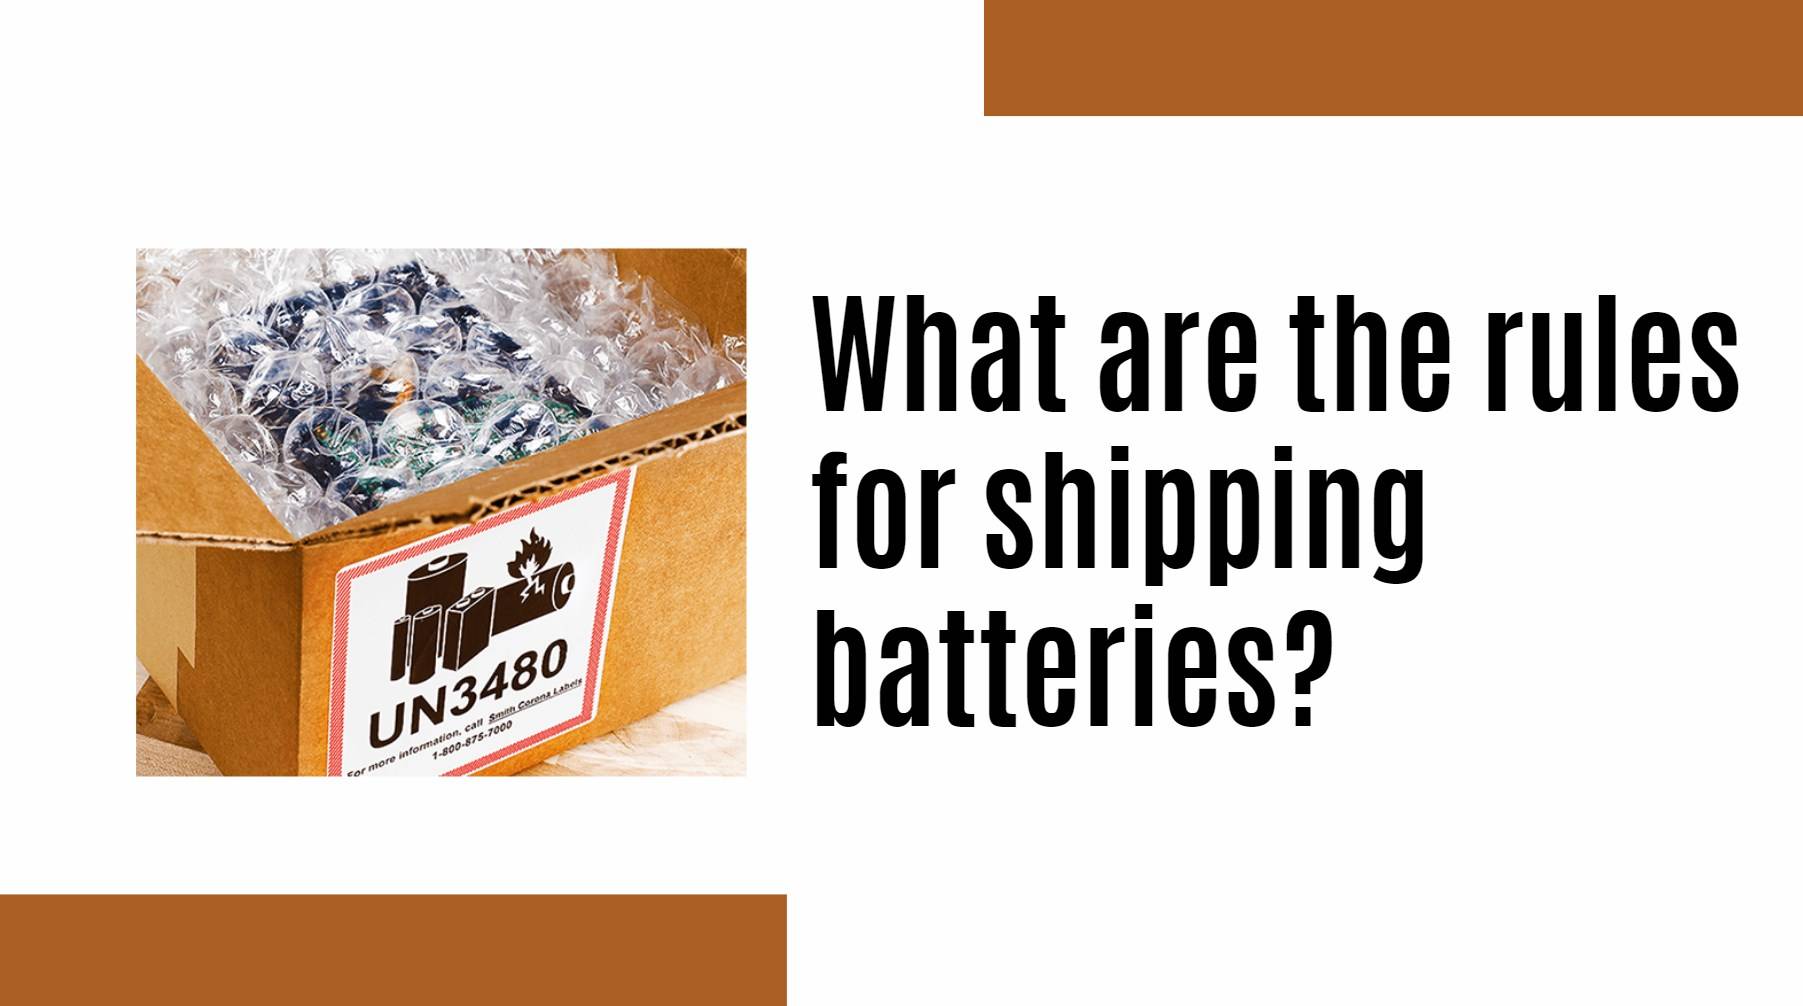 What are the rules for shipping batteries?